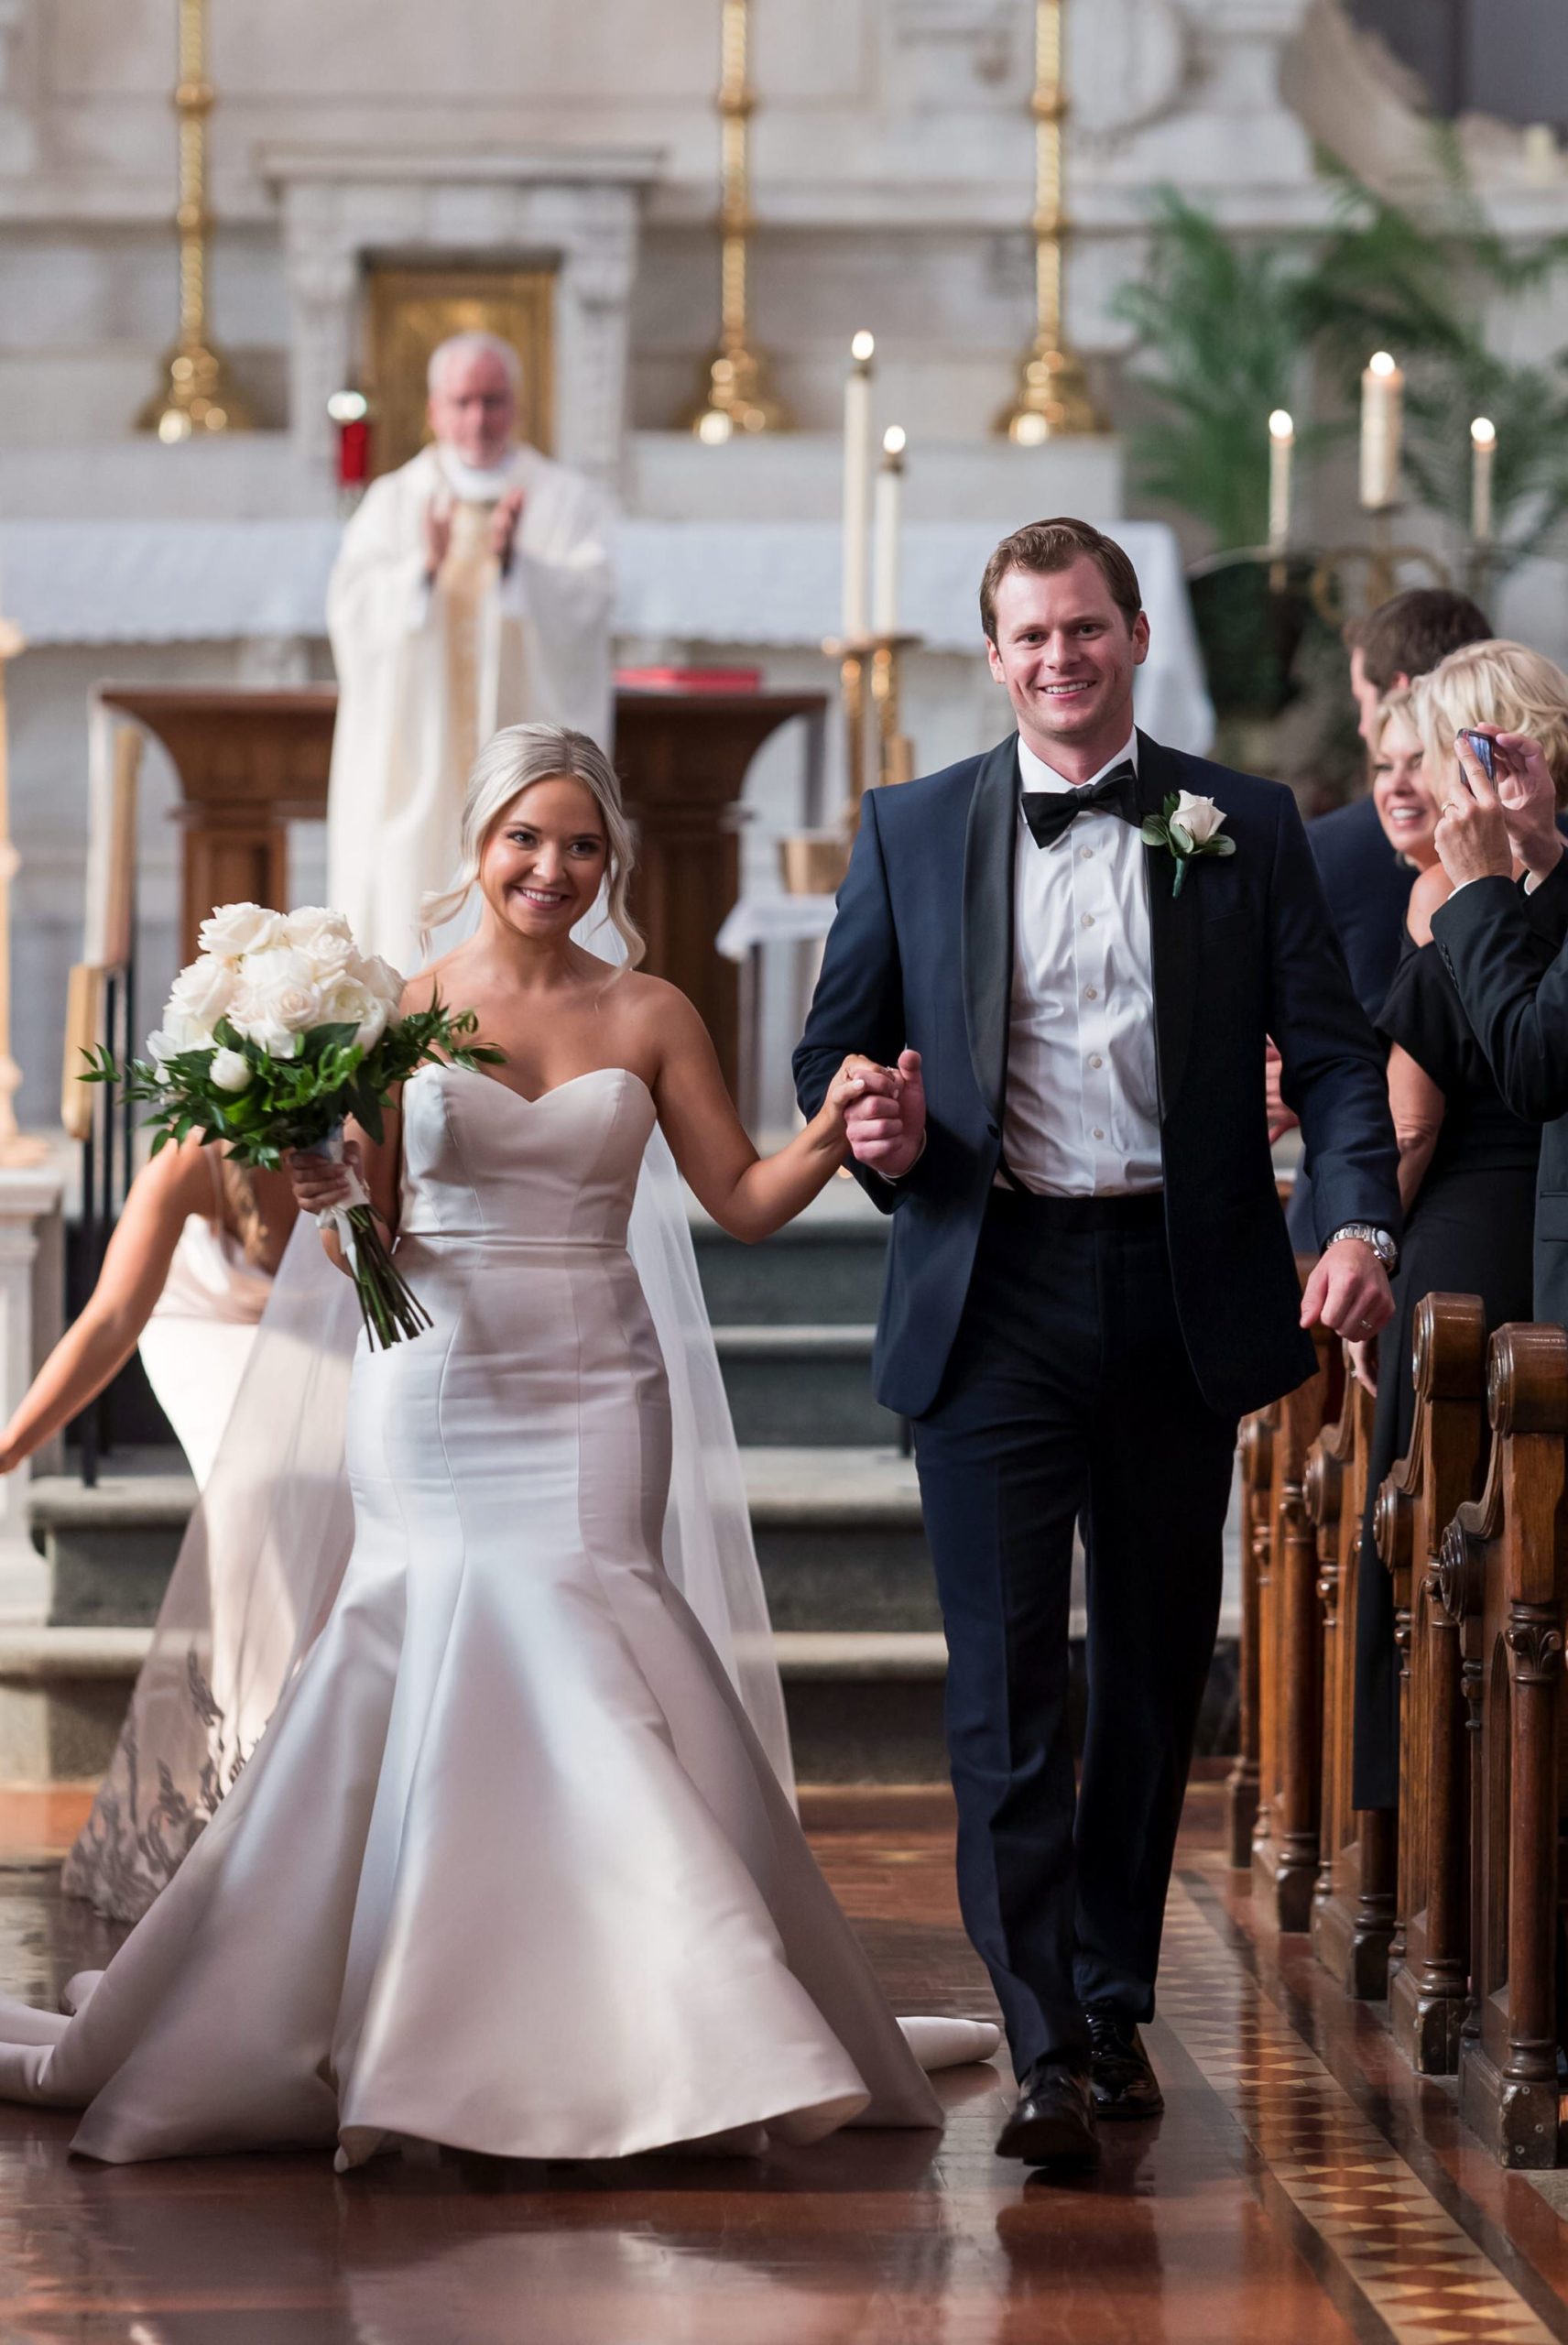 A bride and groom walk down the aisle at their wedding at Saints Peter and Paul Jesuit Church in Detroit.  